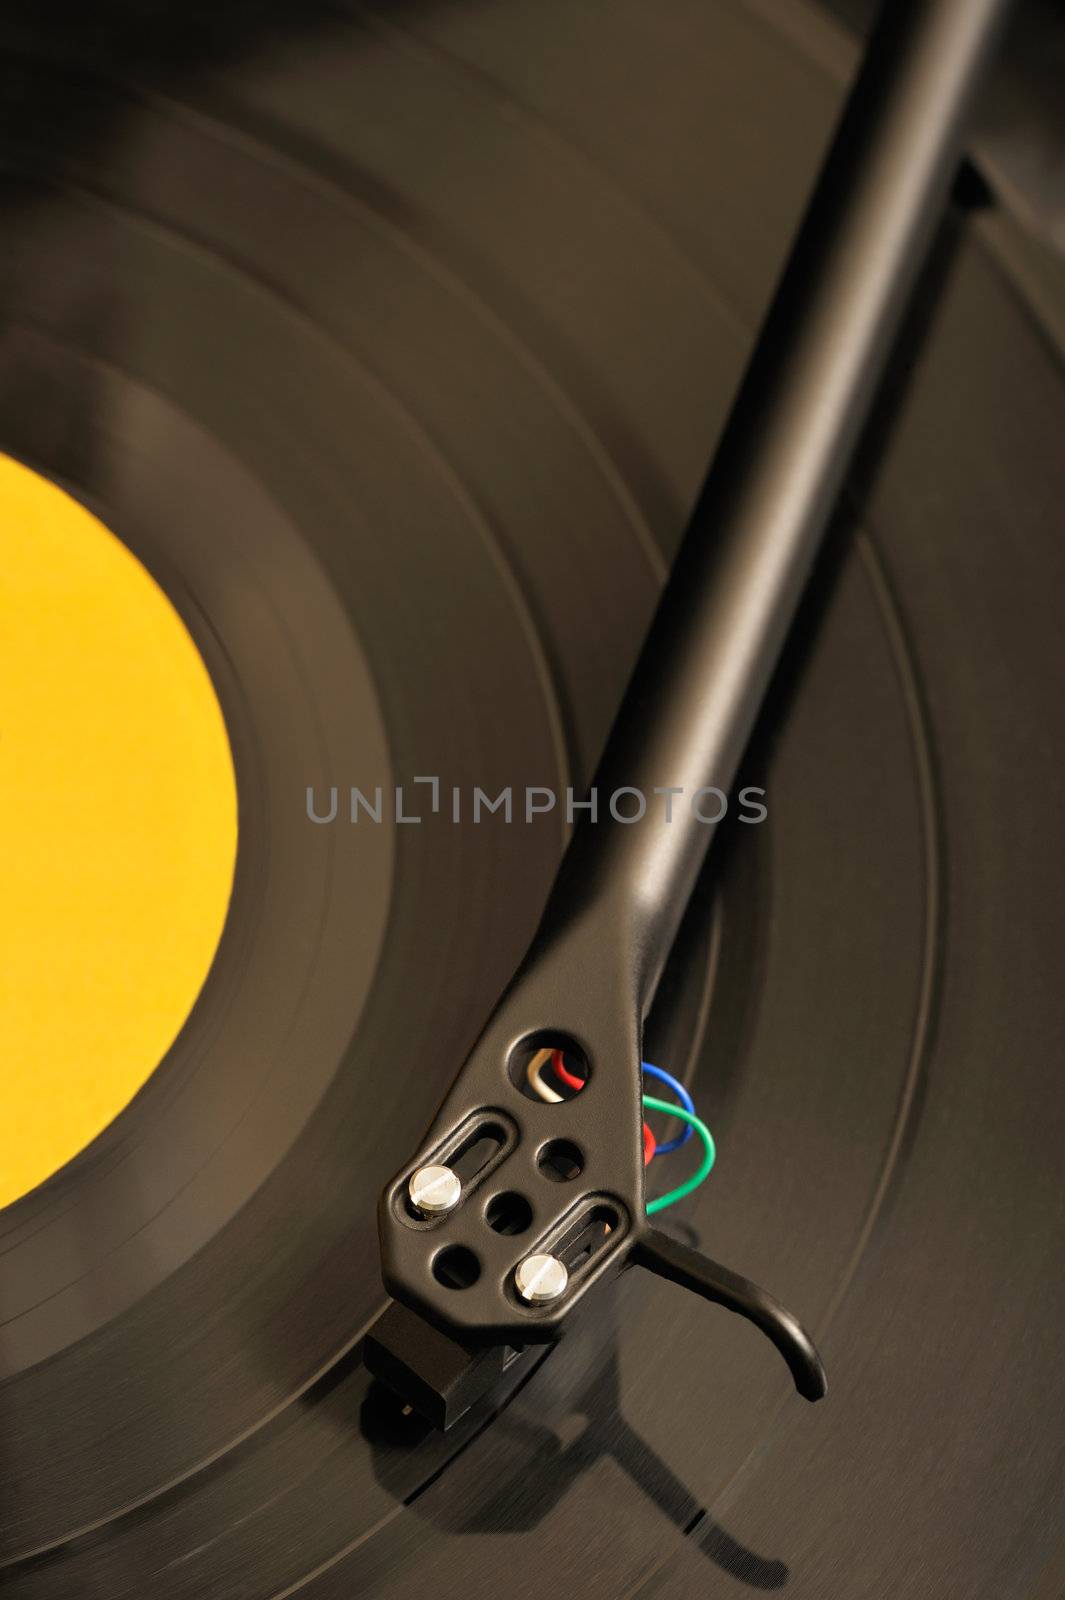 Close-up image of a turntable playing a record with a yellow label